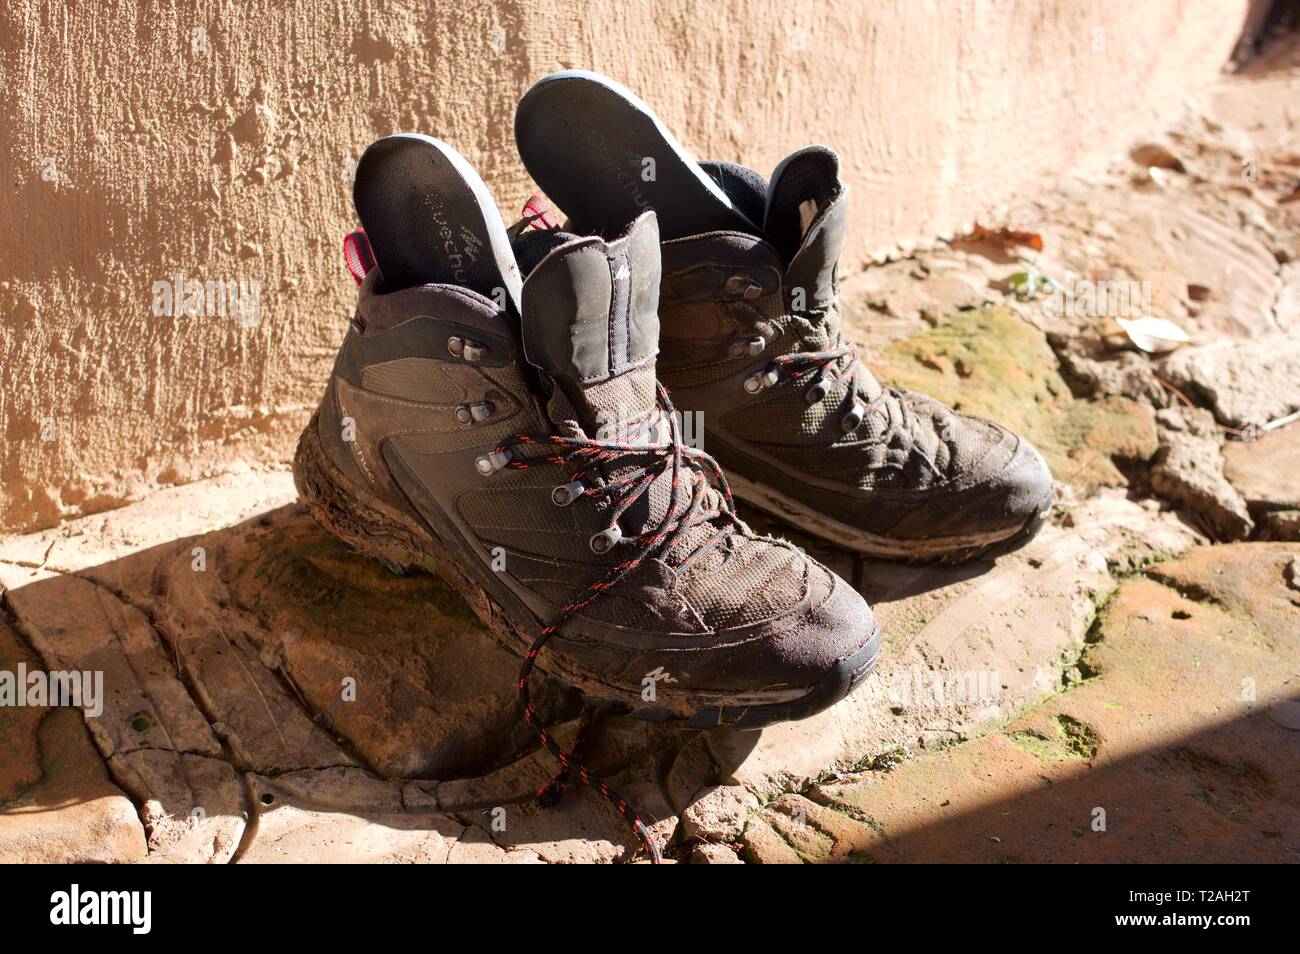 Muddy Shoes High Resolution Stock Photography and Images - Alamy